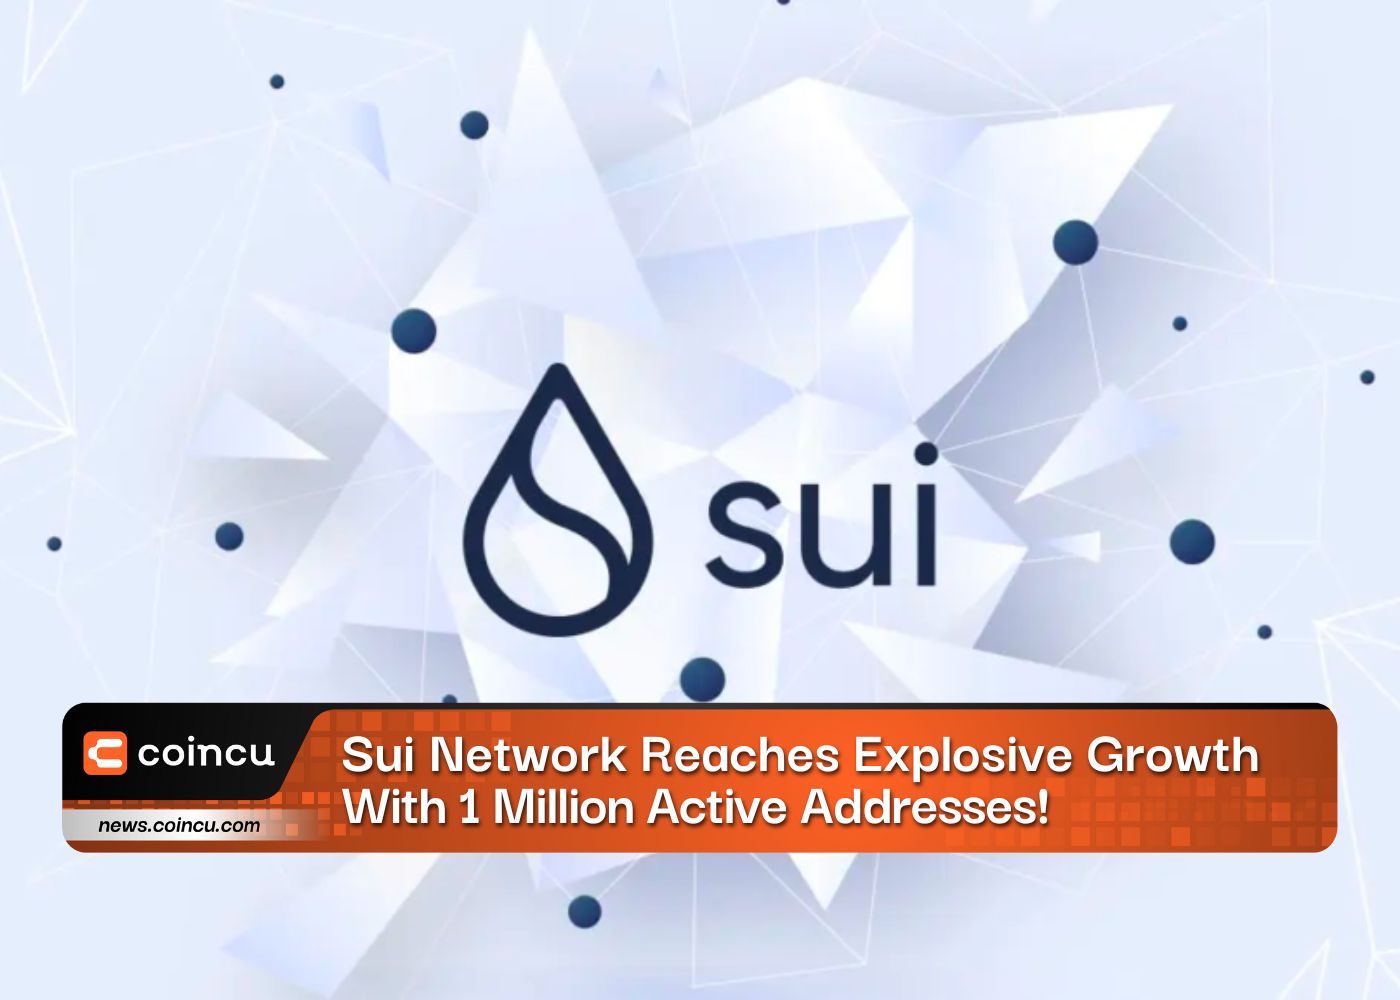 Sui Network Reaches Explosive Growth